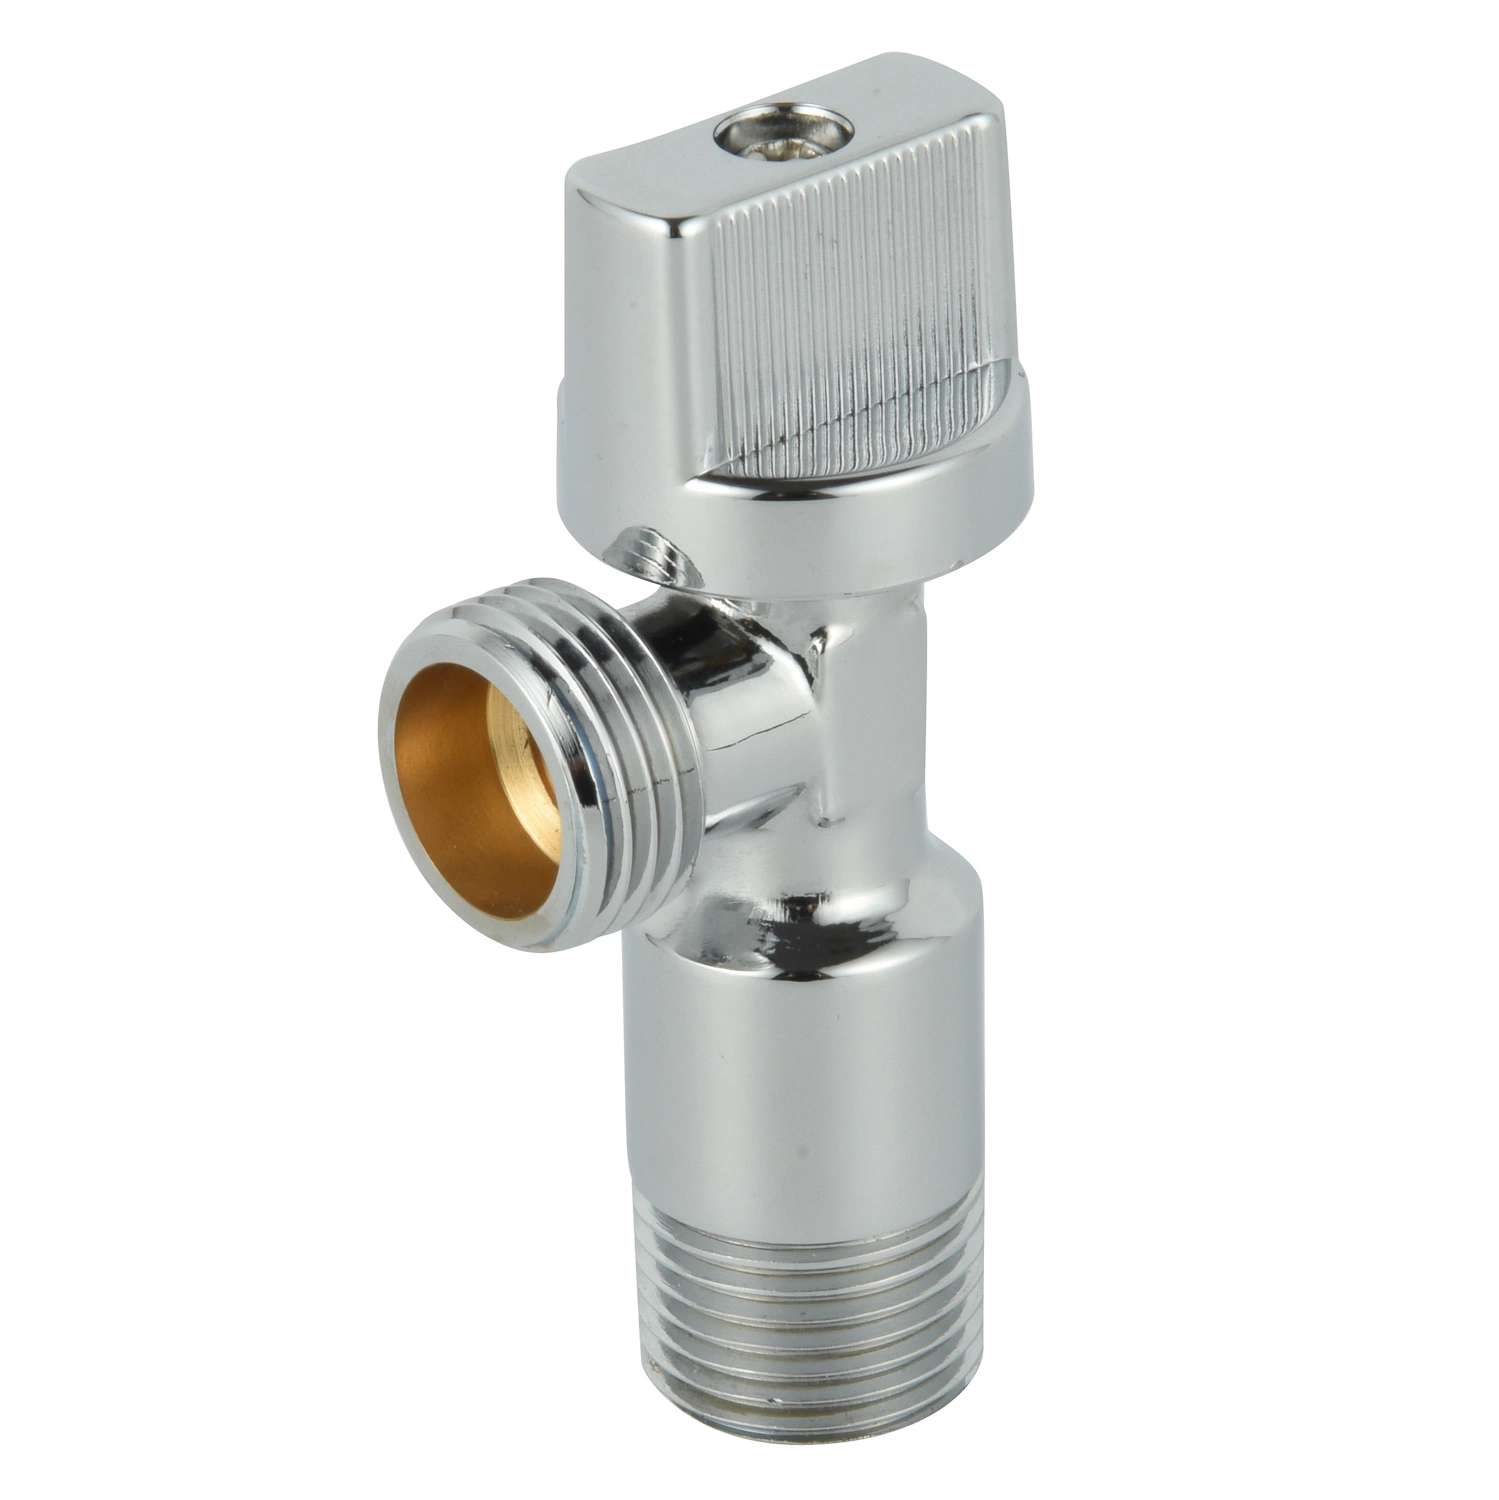 Toilet Angle Valve Bathroom Accessories with Chrome Plated